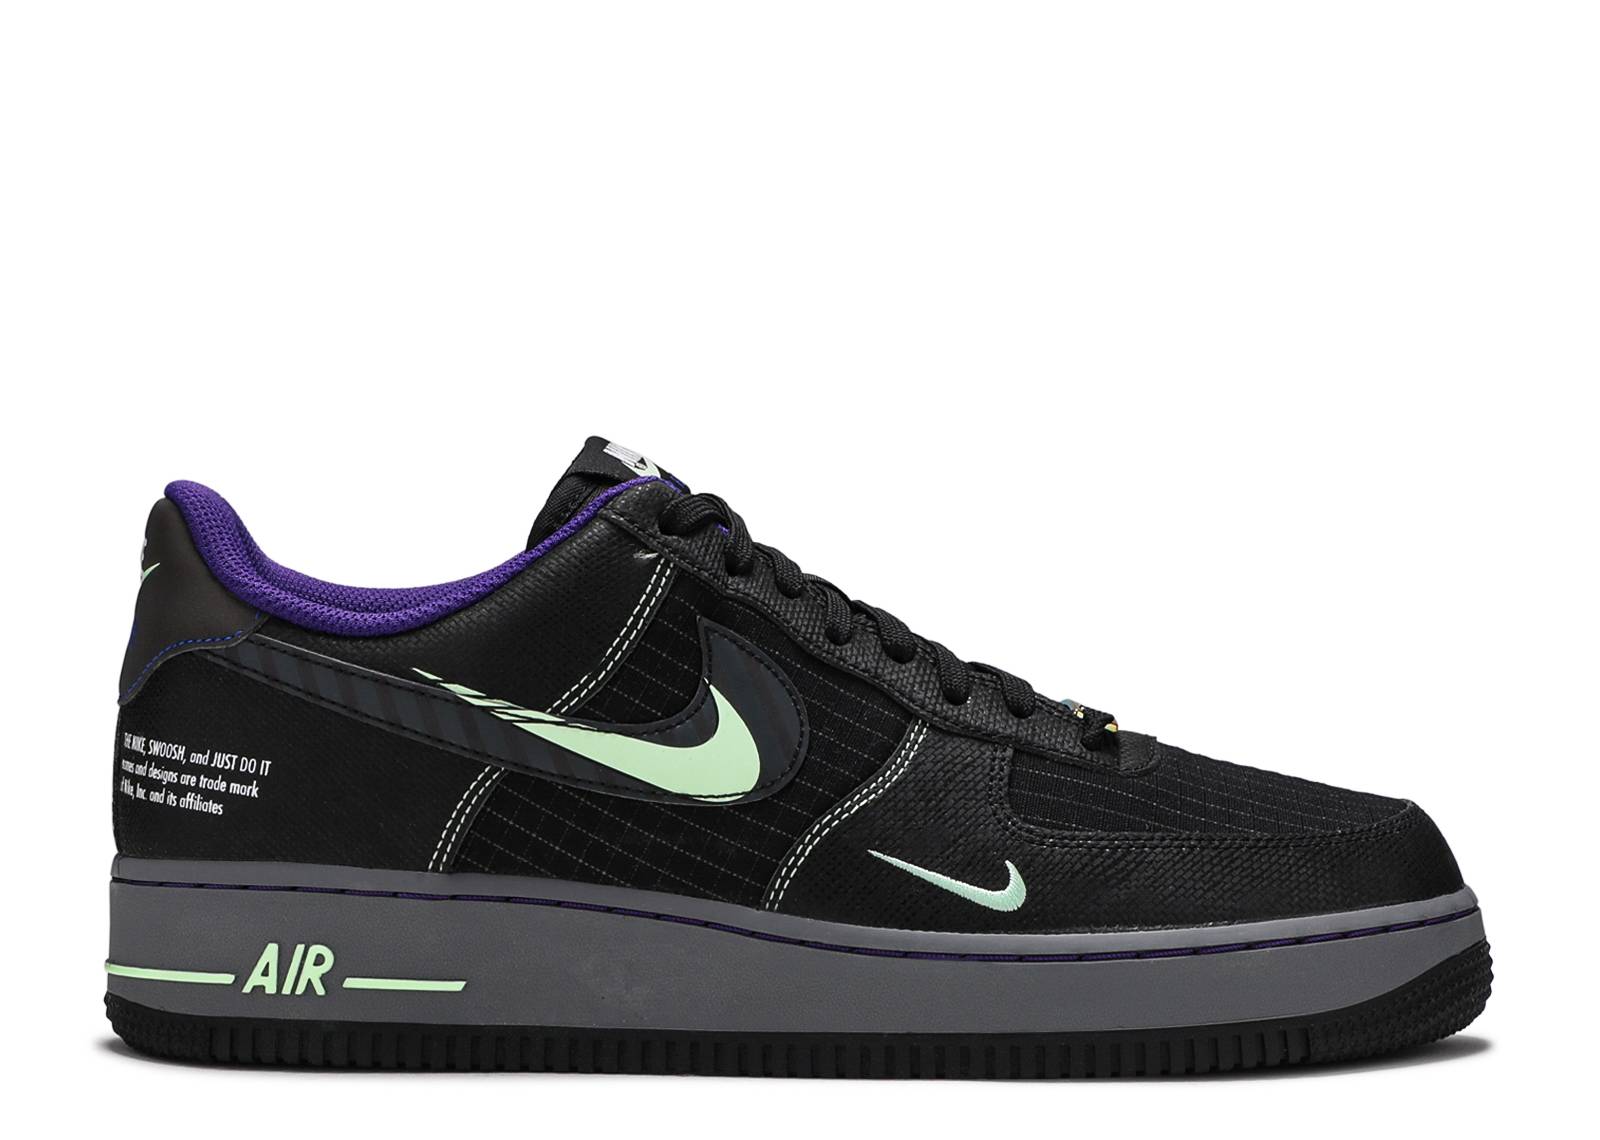 Air Force 1 '07 LV8 Low 'Future Swoosh'